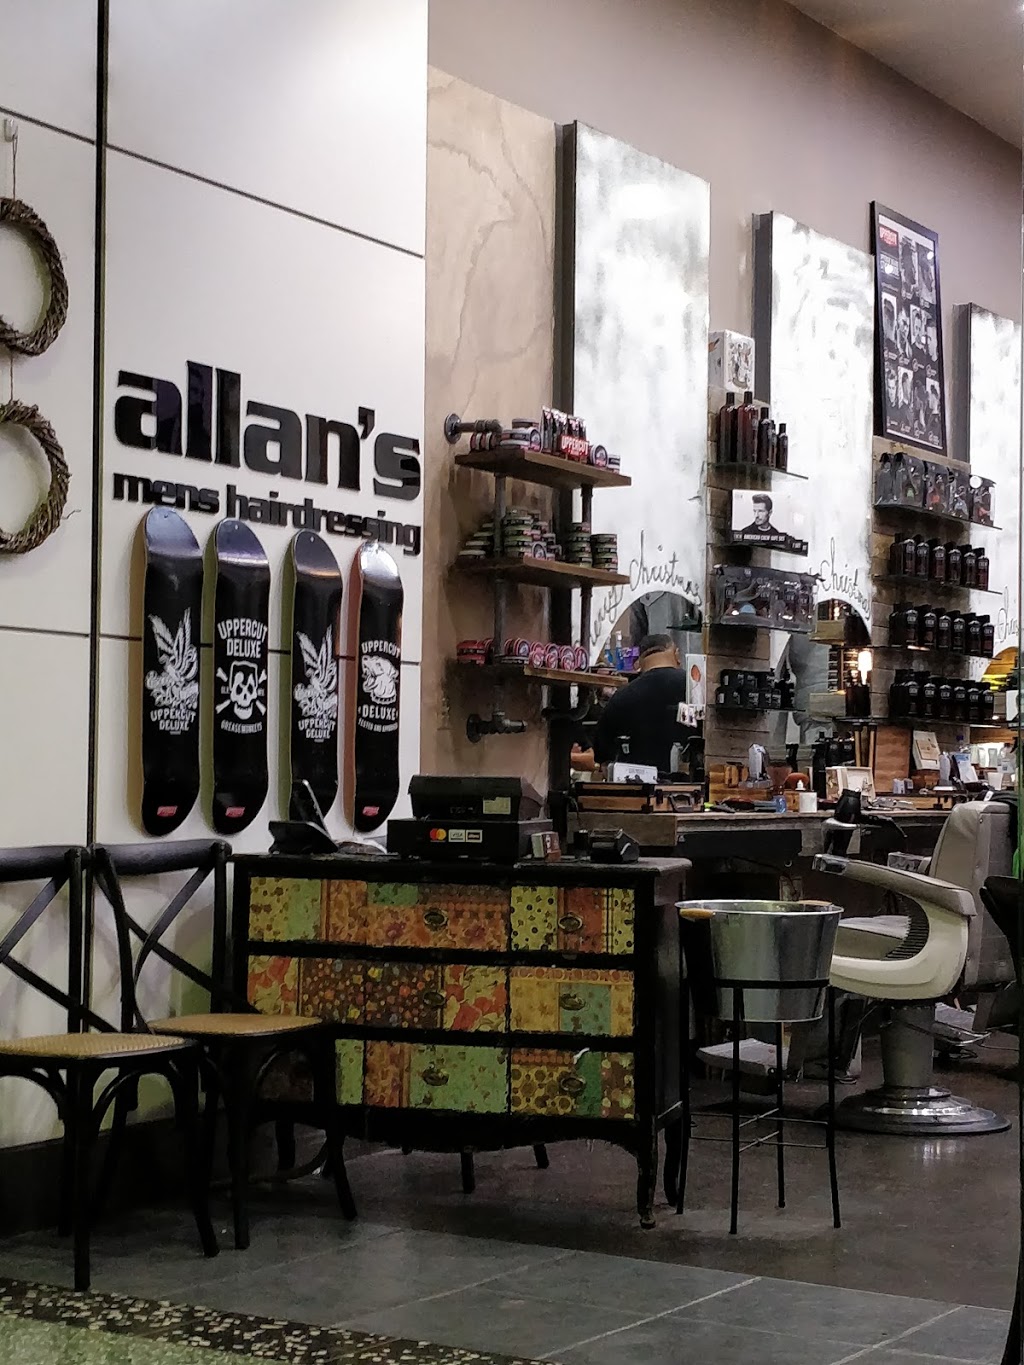 Allans Mens Hairdressing | hair care | 2 Florence St, Hornsby NSW 2077, Australia | 0294821836 OR +61 2 9482 1836